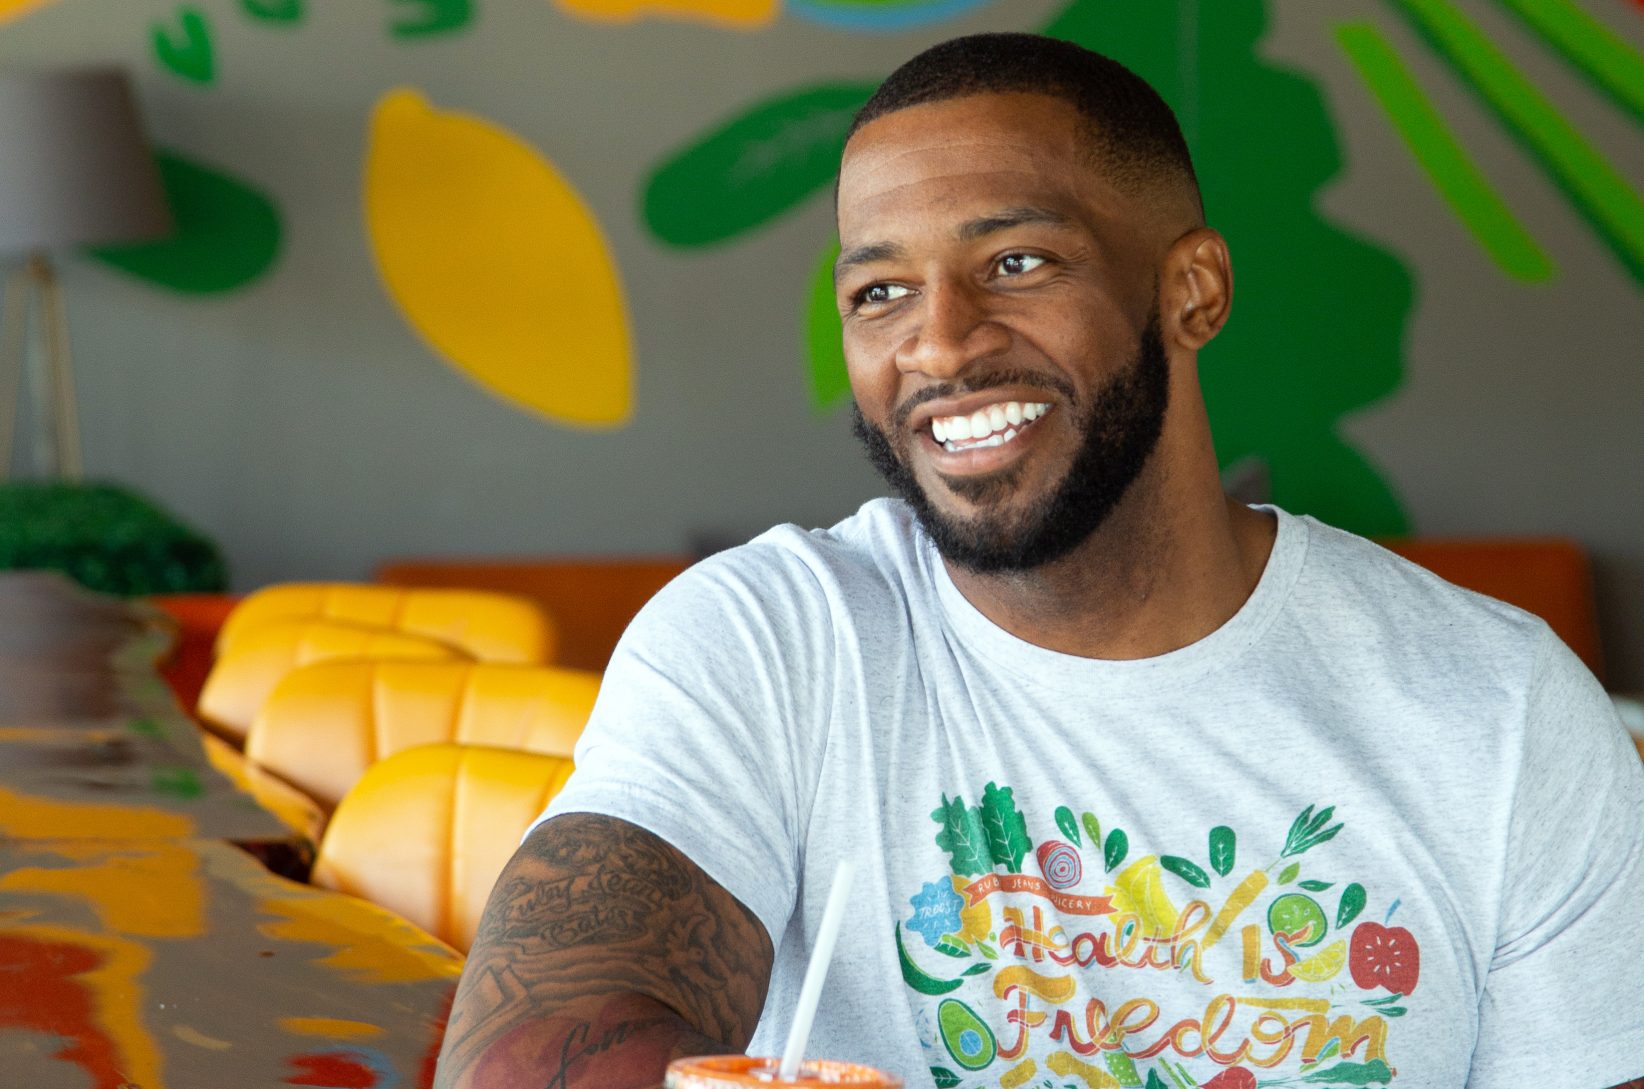 Ruby Jean’s Whole Foods spot will blend in Troost inclusivity, Chris Goode pledges